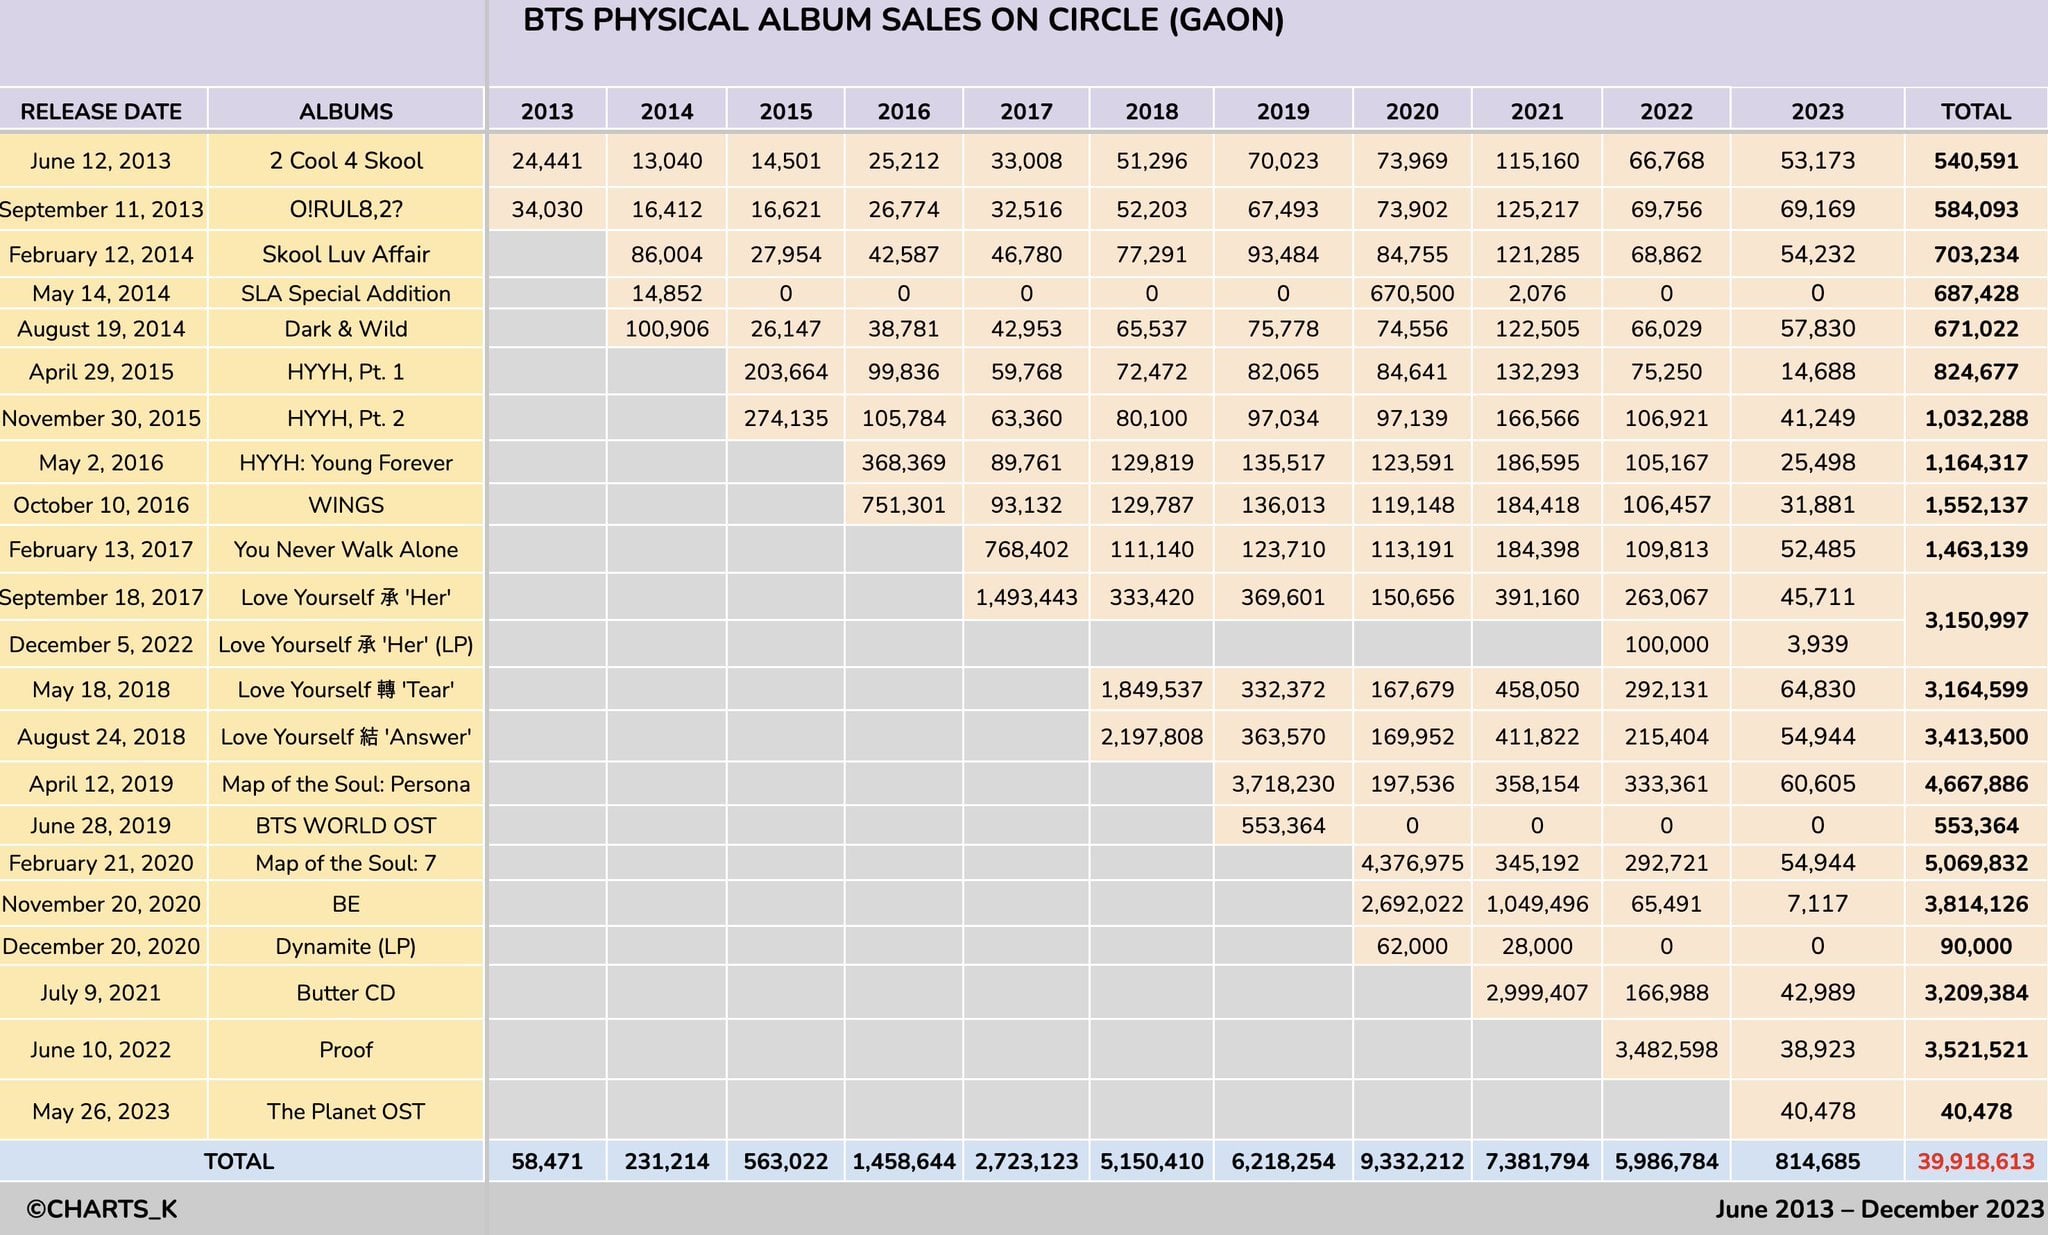 240111 BTS have sold over 39.9 million physical albums as a group on Circle Album Chart, with over 800,000 sold in 2023!